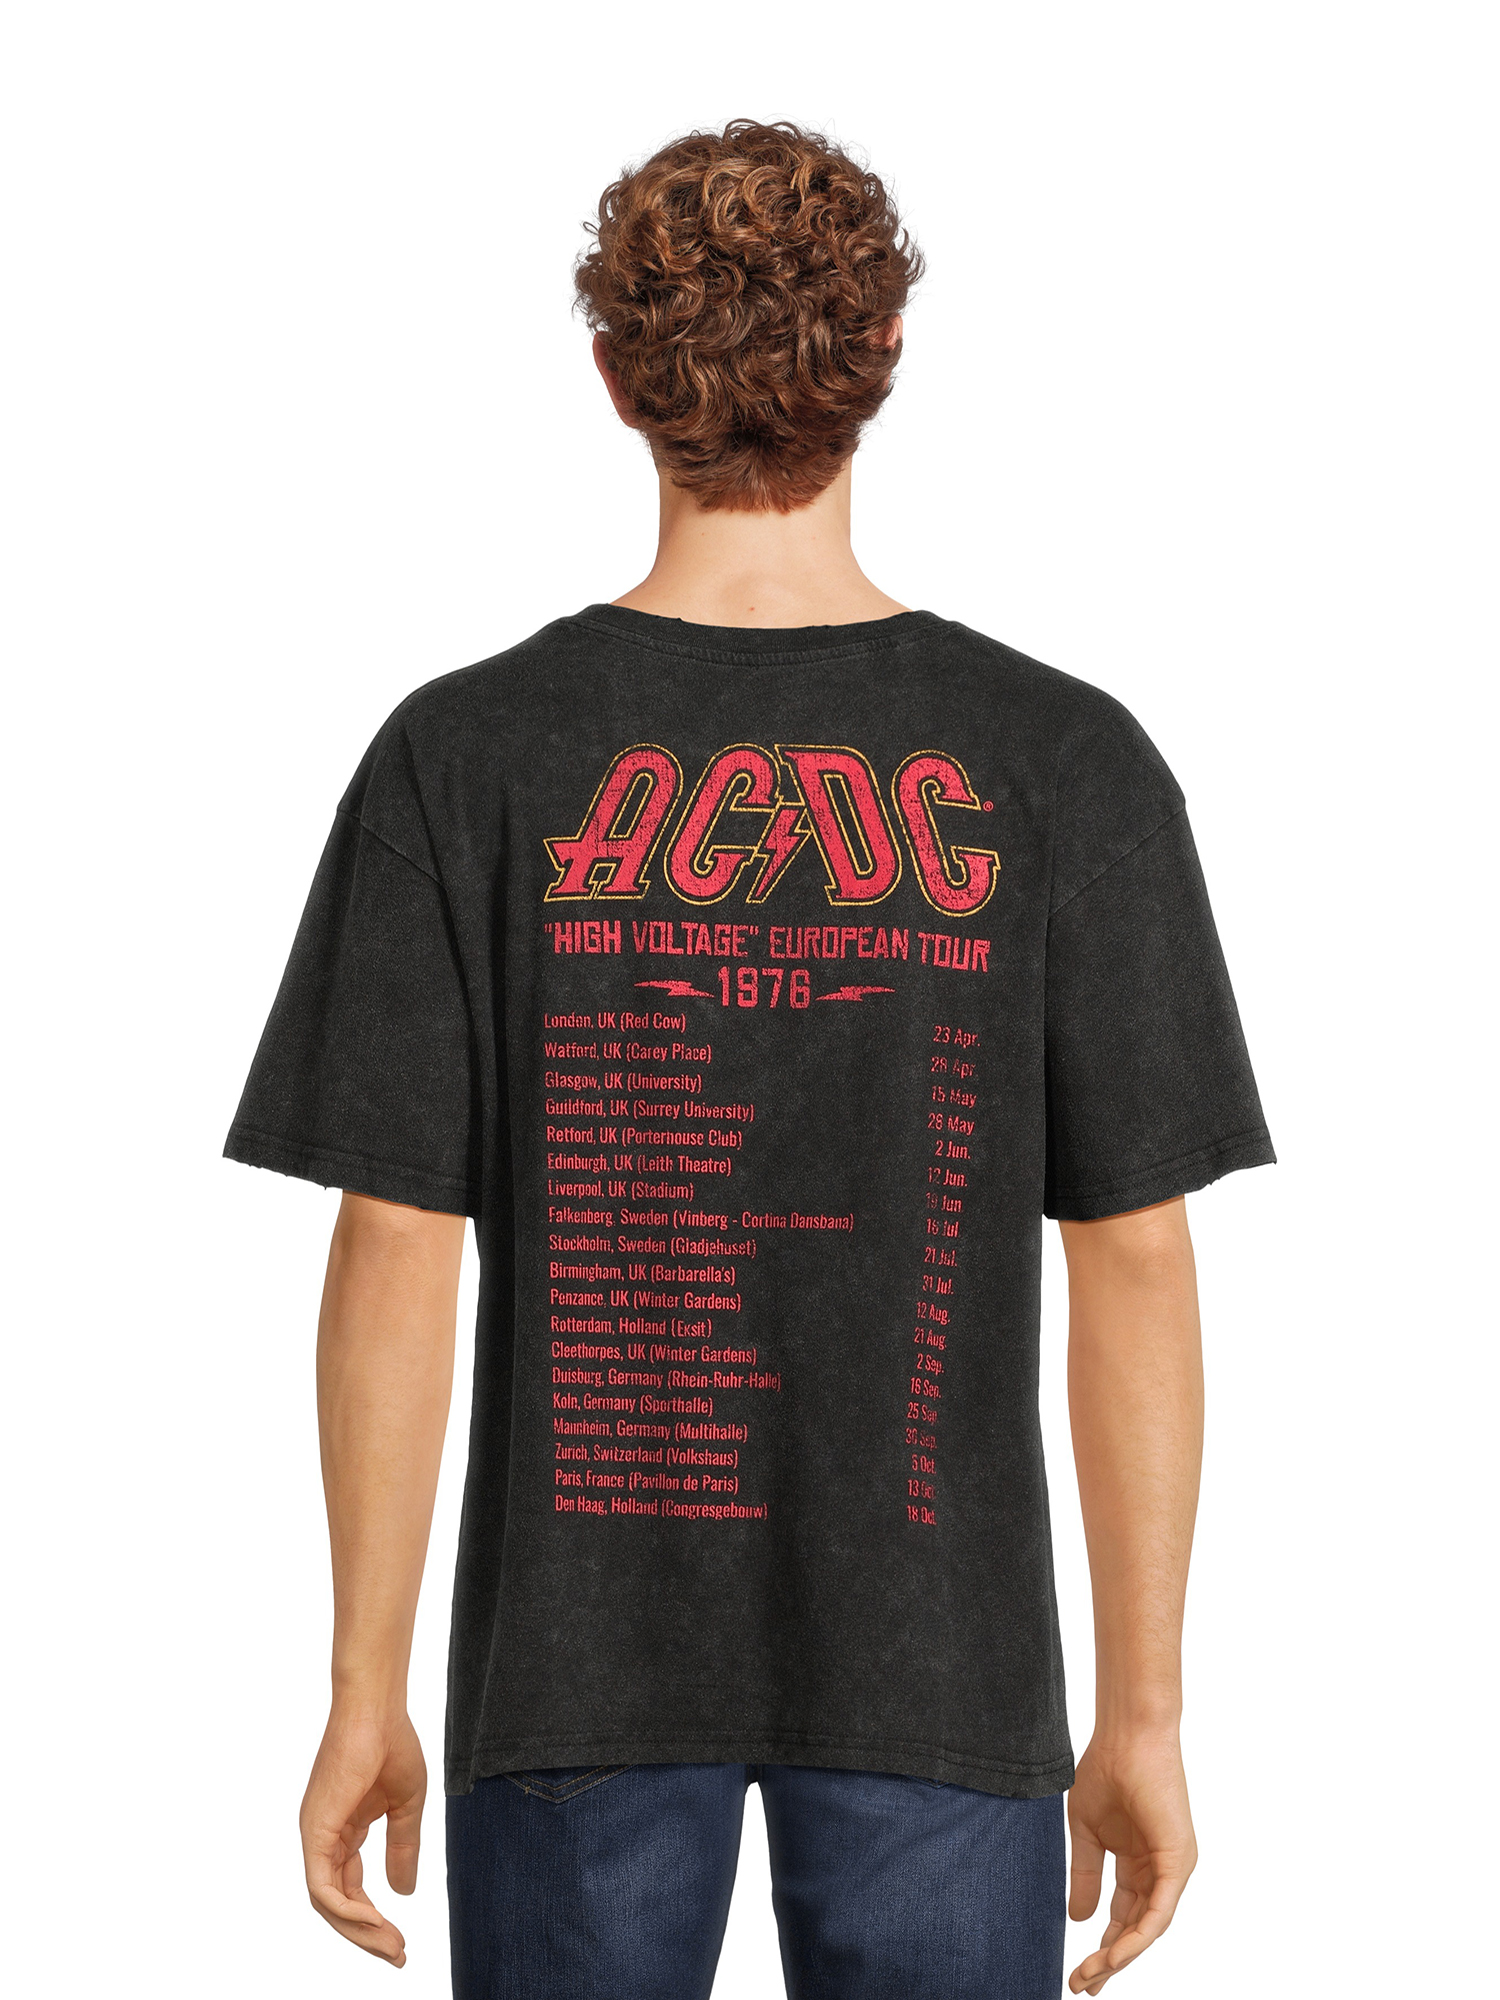 ACDC Men’s and Big Men’s Oversized Graphic Band Tee, Sizes XS-3XL - image 3 of 5